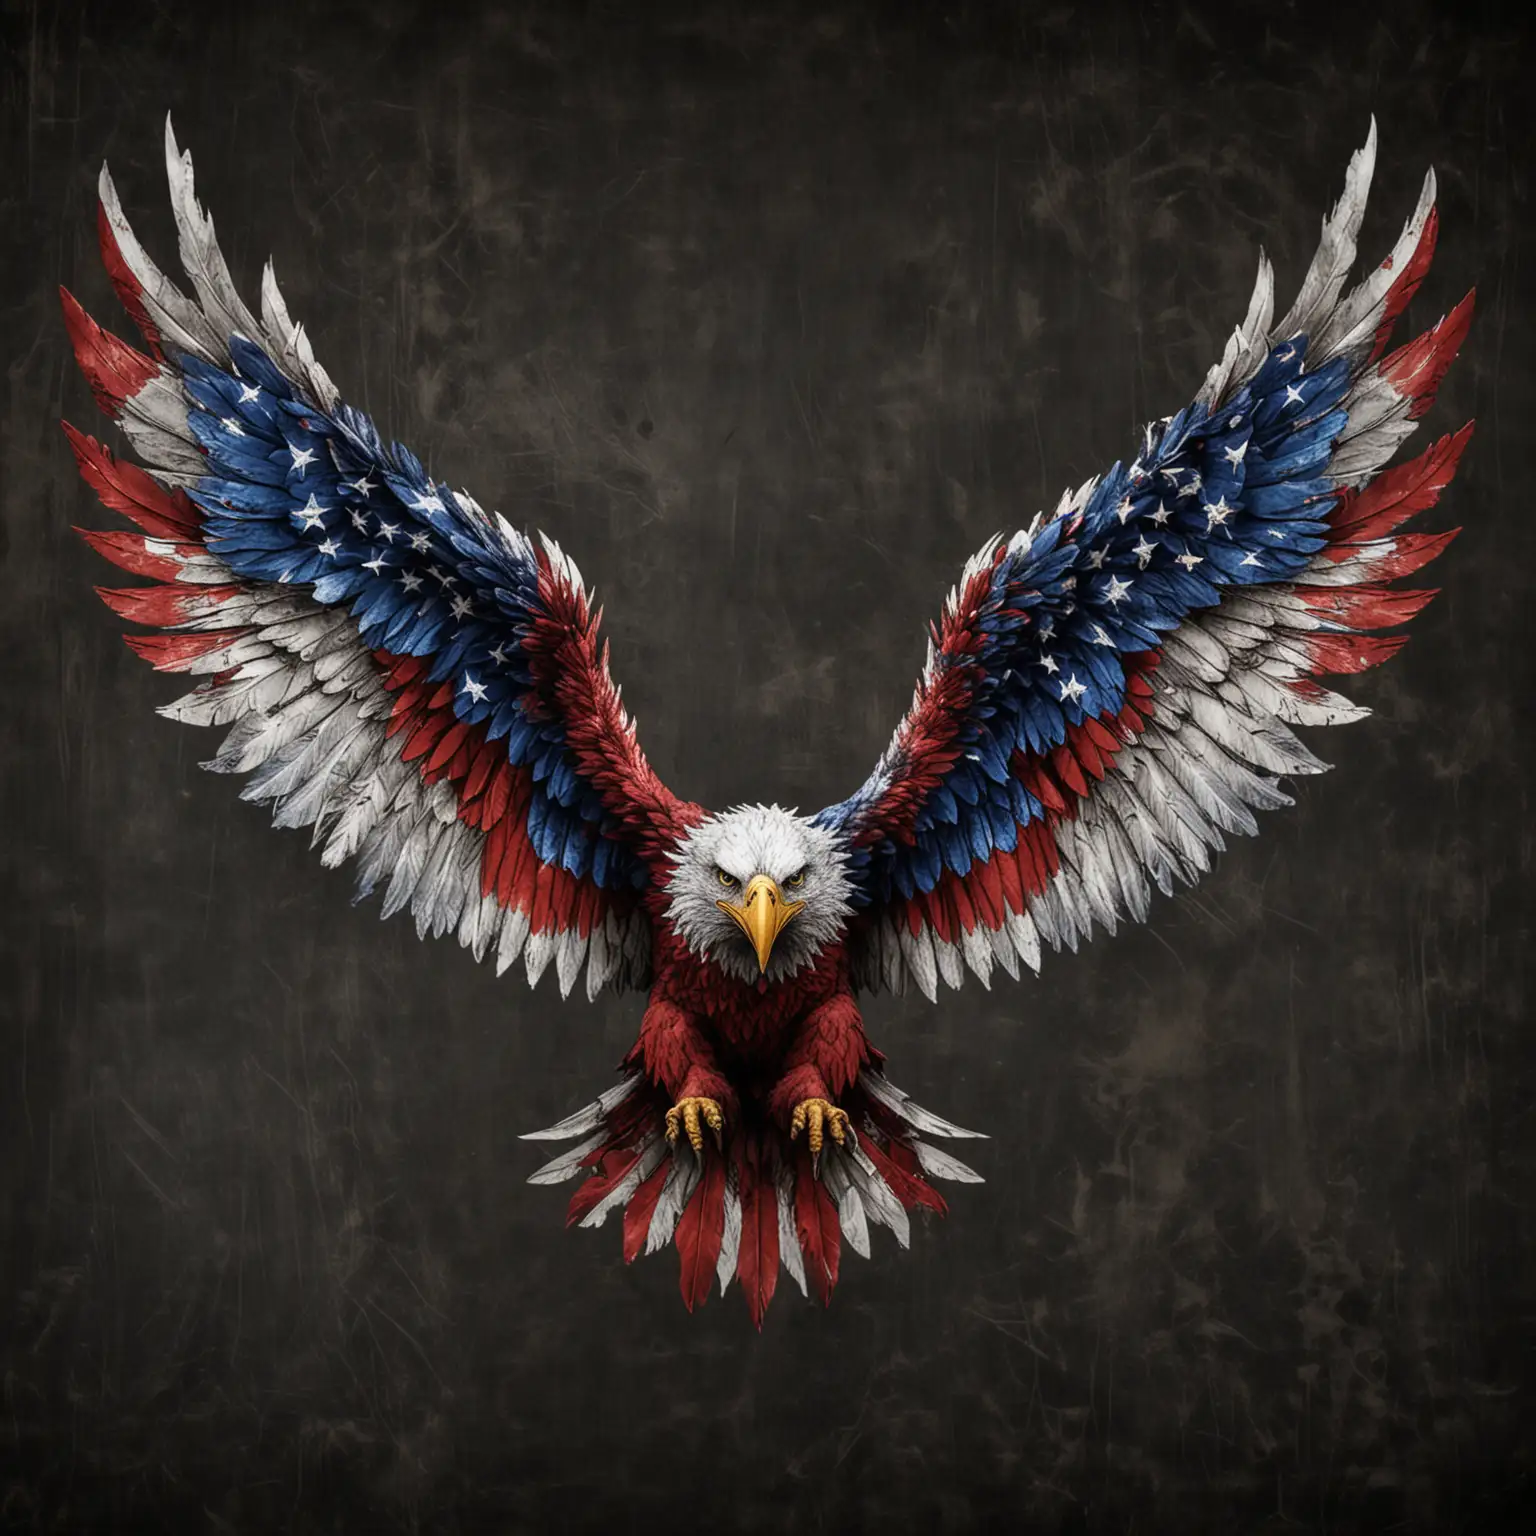 Majestic Distressed Eagle Wings Soaring in Red White and Blue Darkness